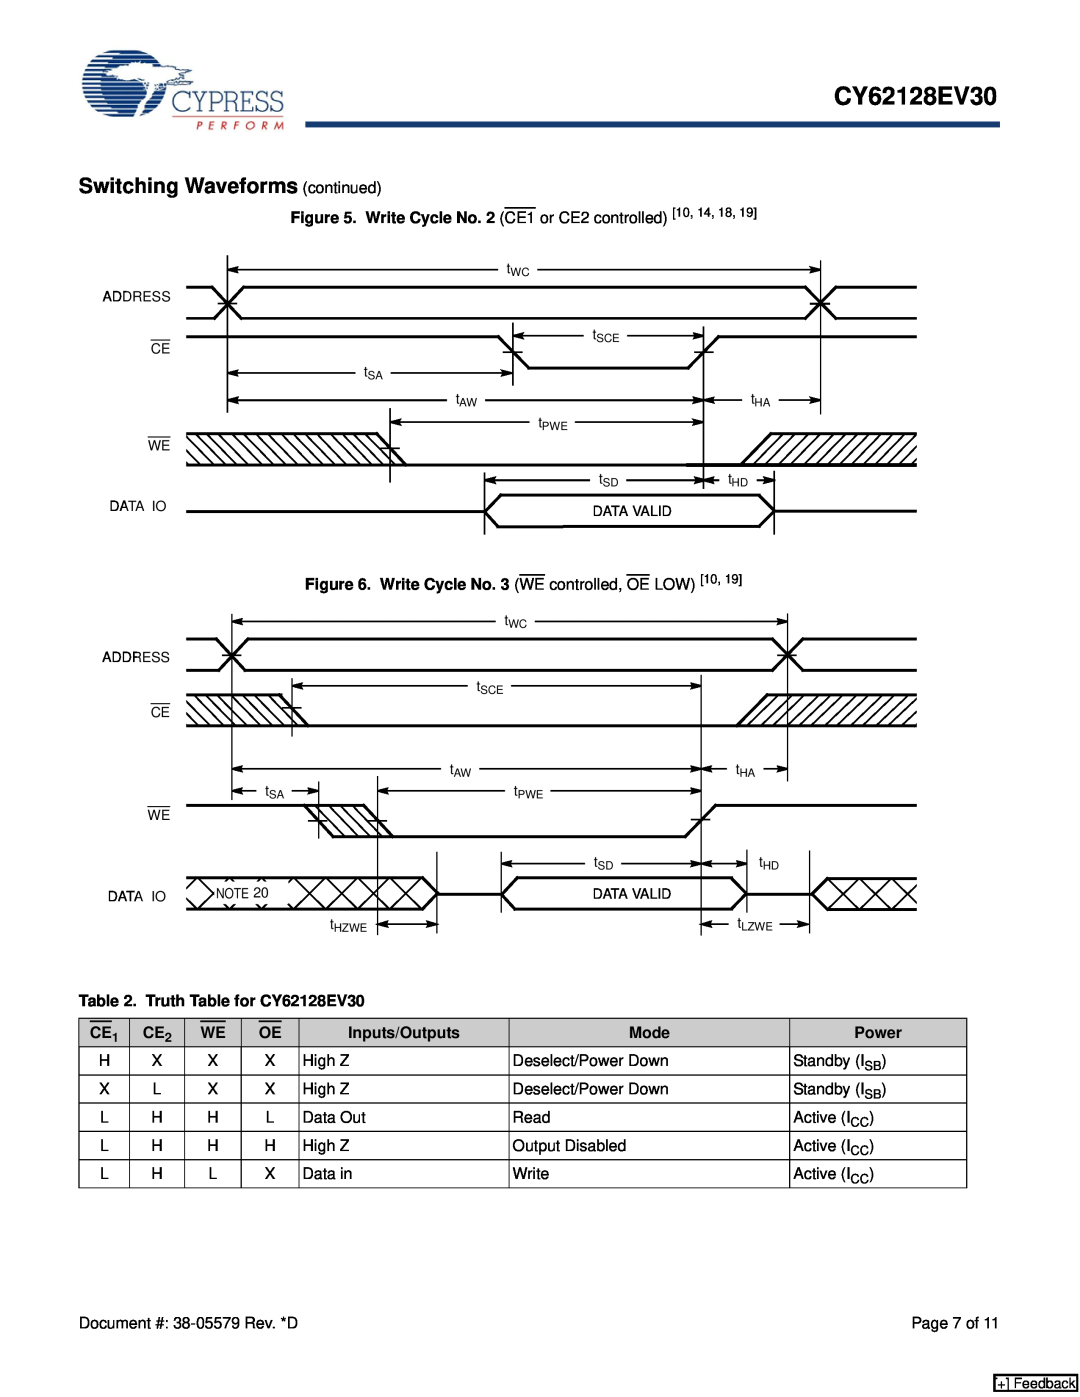 Cypress CY62128EV30 manual Switching Waveforms continued 